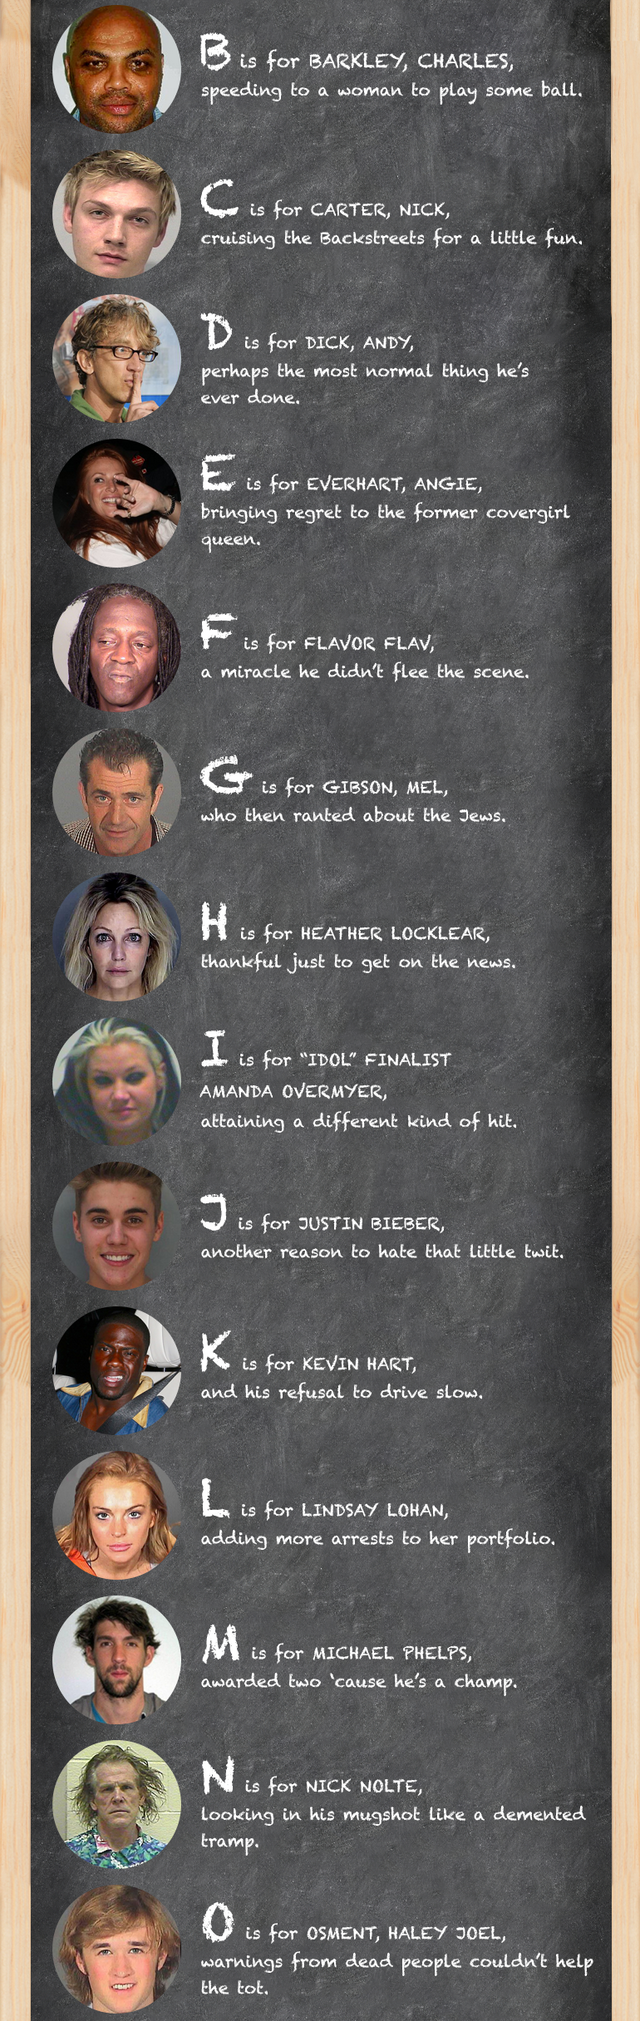 The ABC's of Celebrity DUI's